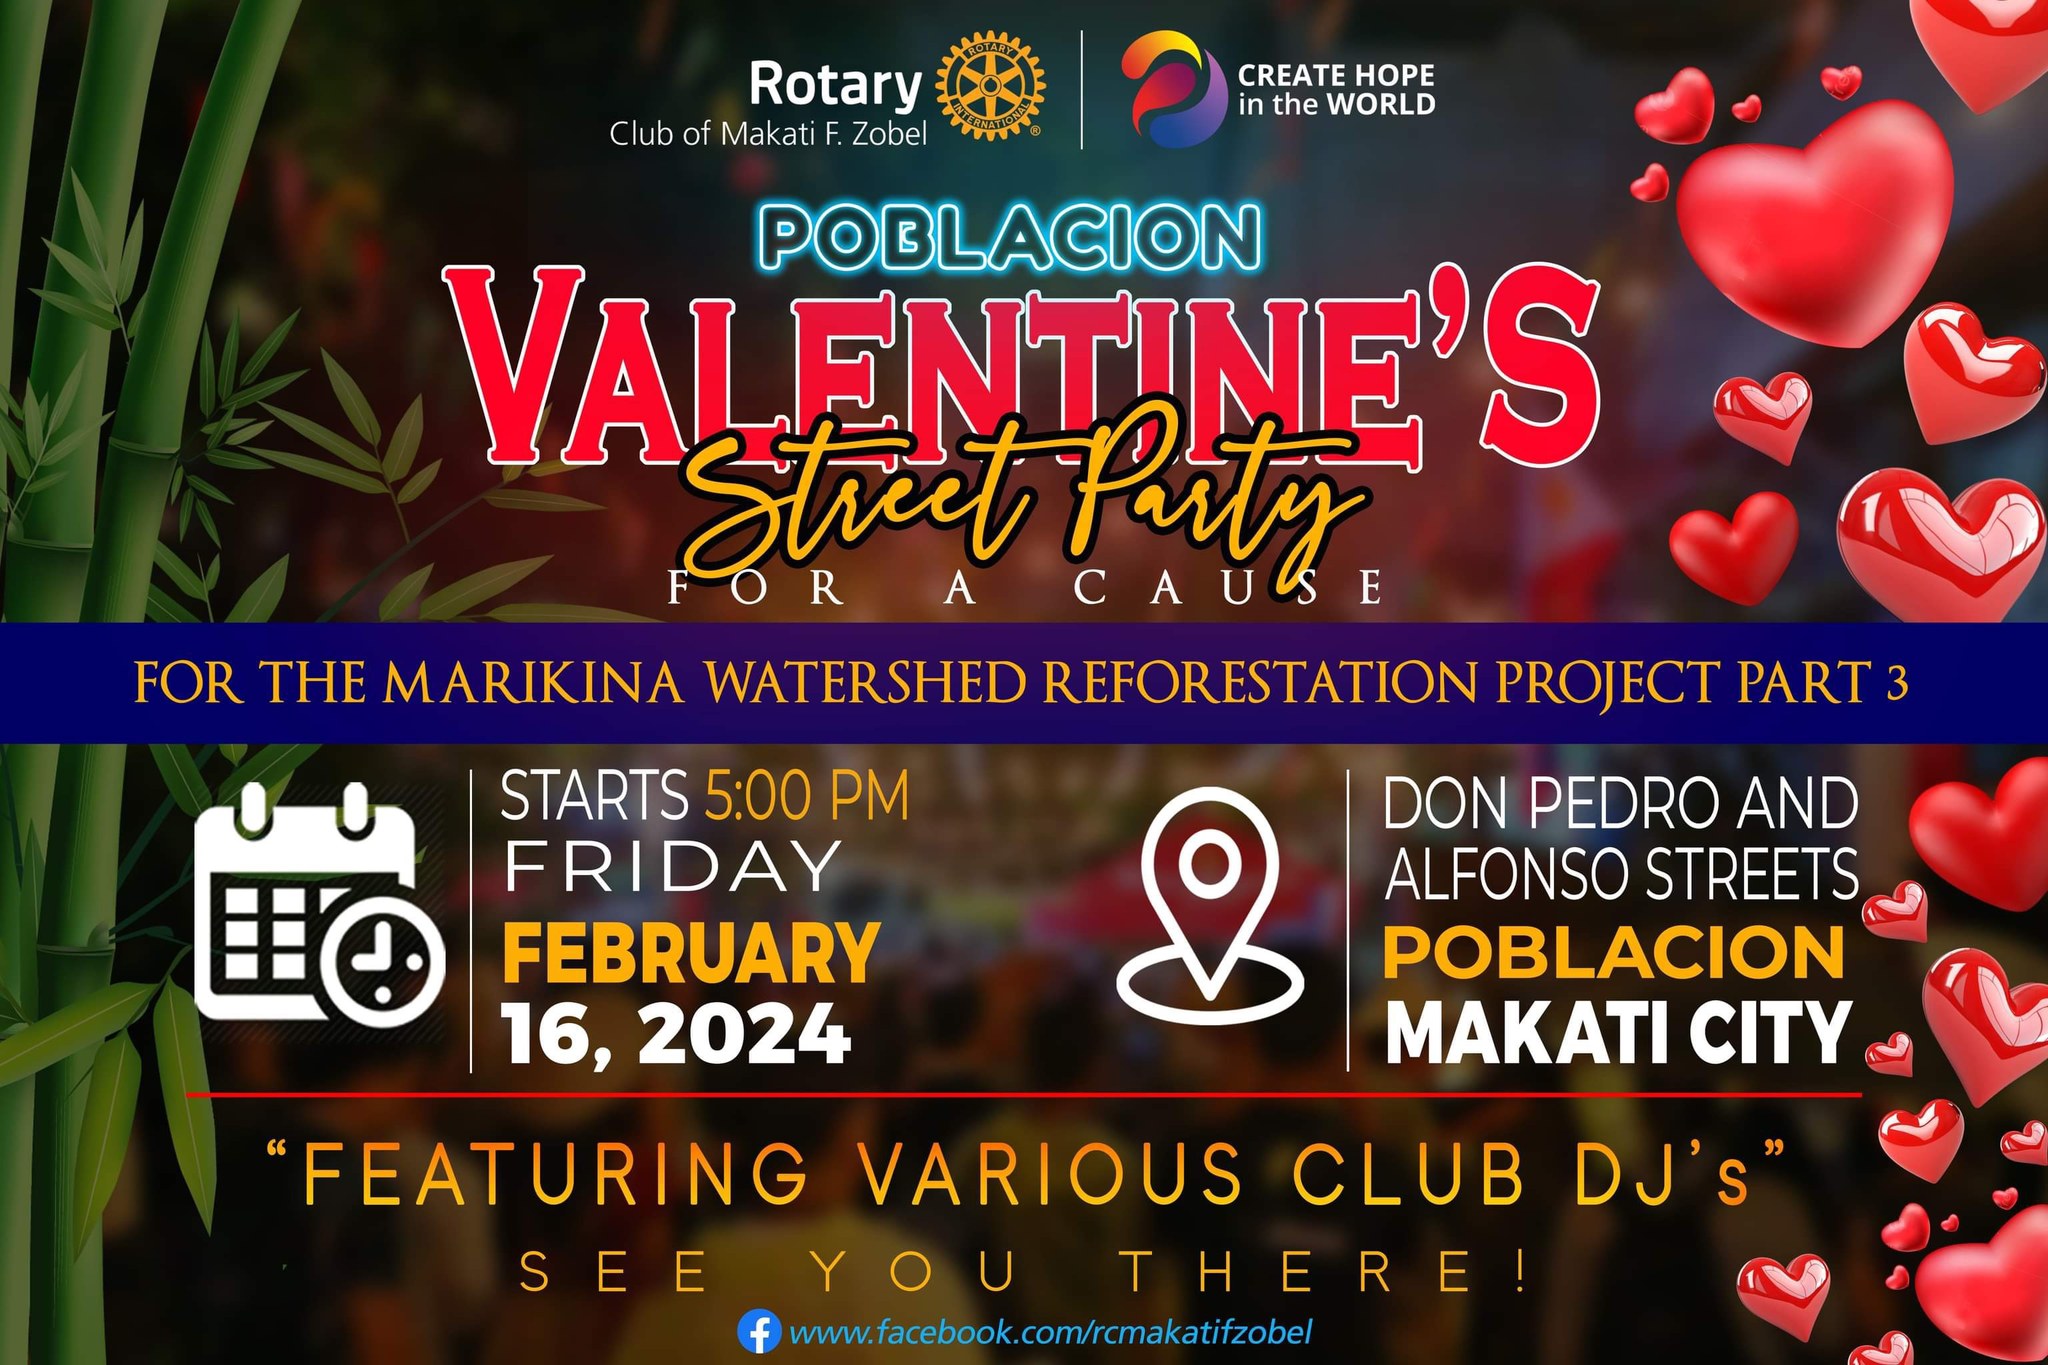 things to do February 2024 - poblacion valentine's street party for a cause